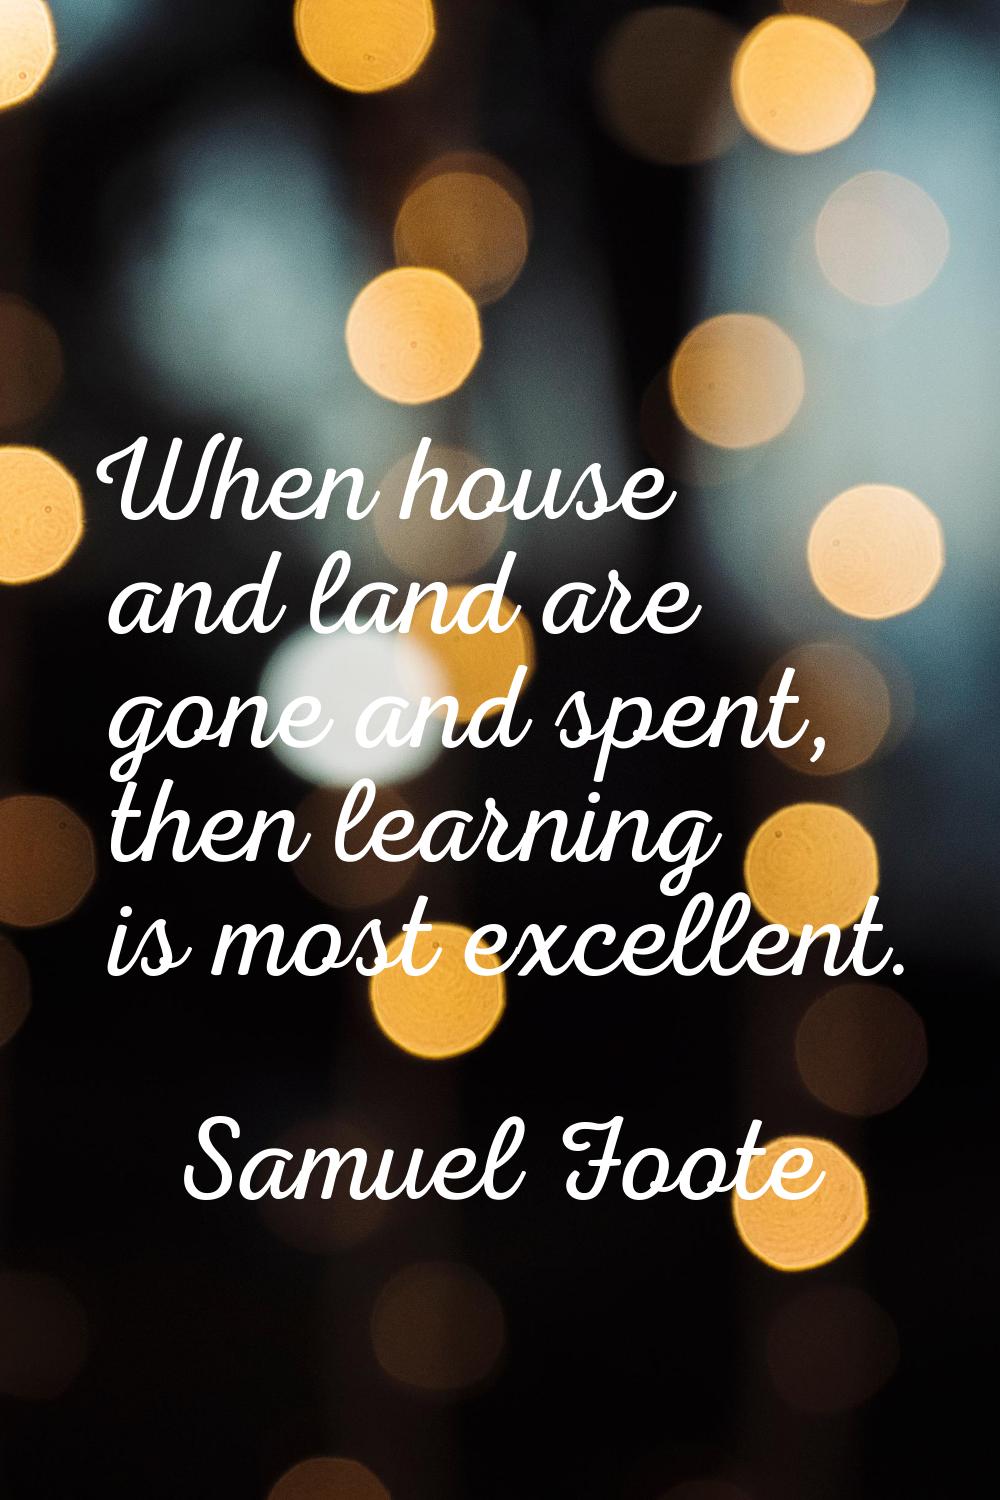 When house and land are gone and spent, then learning is most excellent.